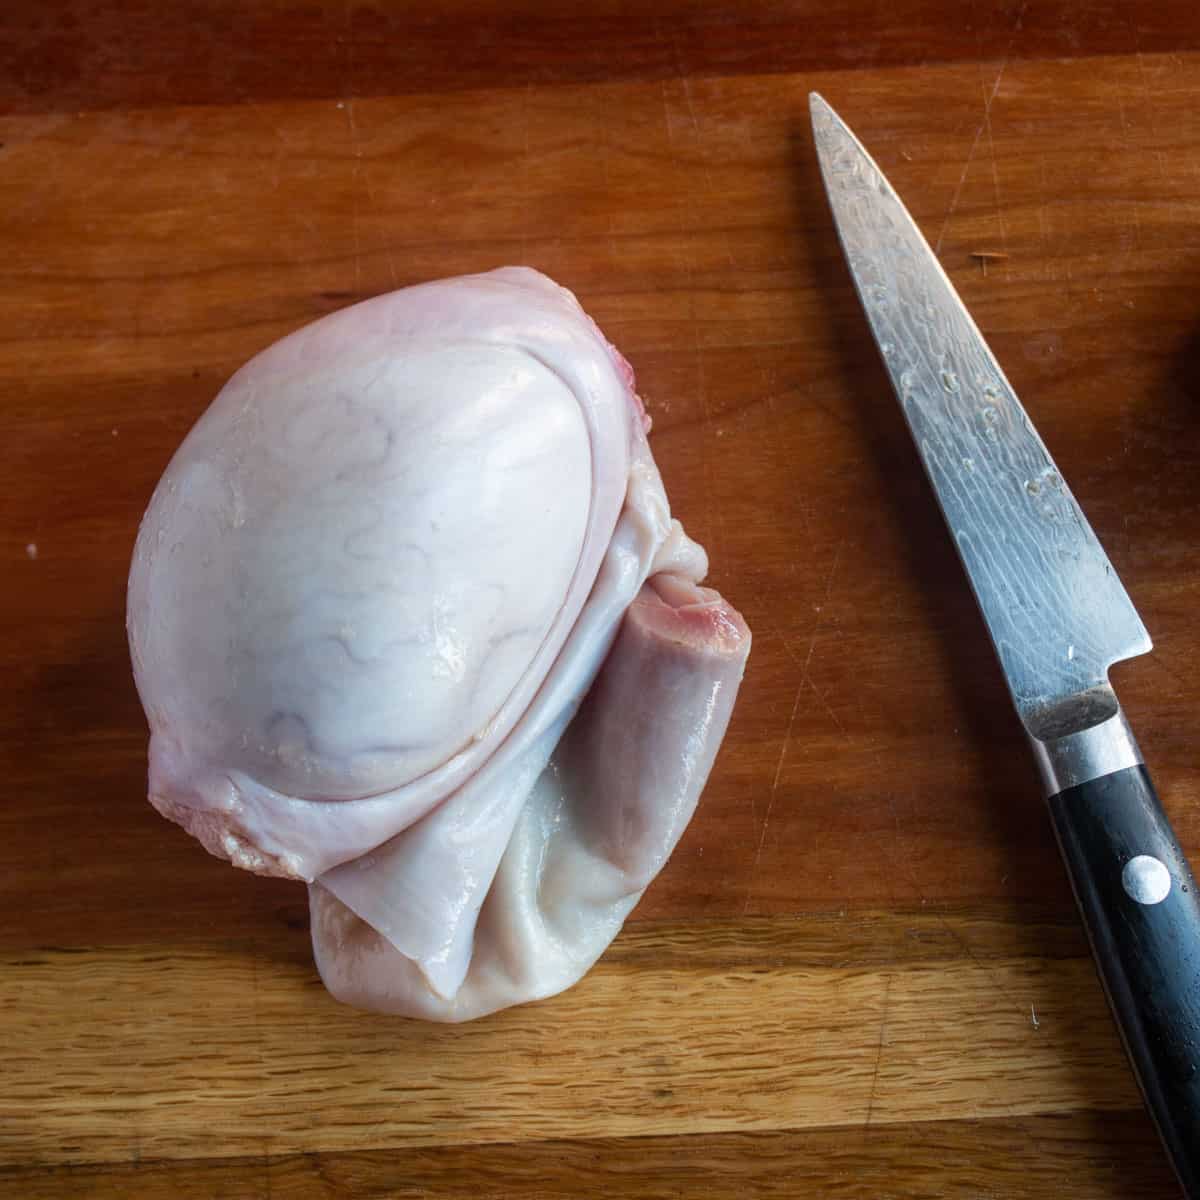 How to clean and cook testicles, lamb fries, or rocky mountain oysters